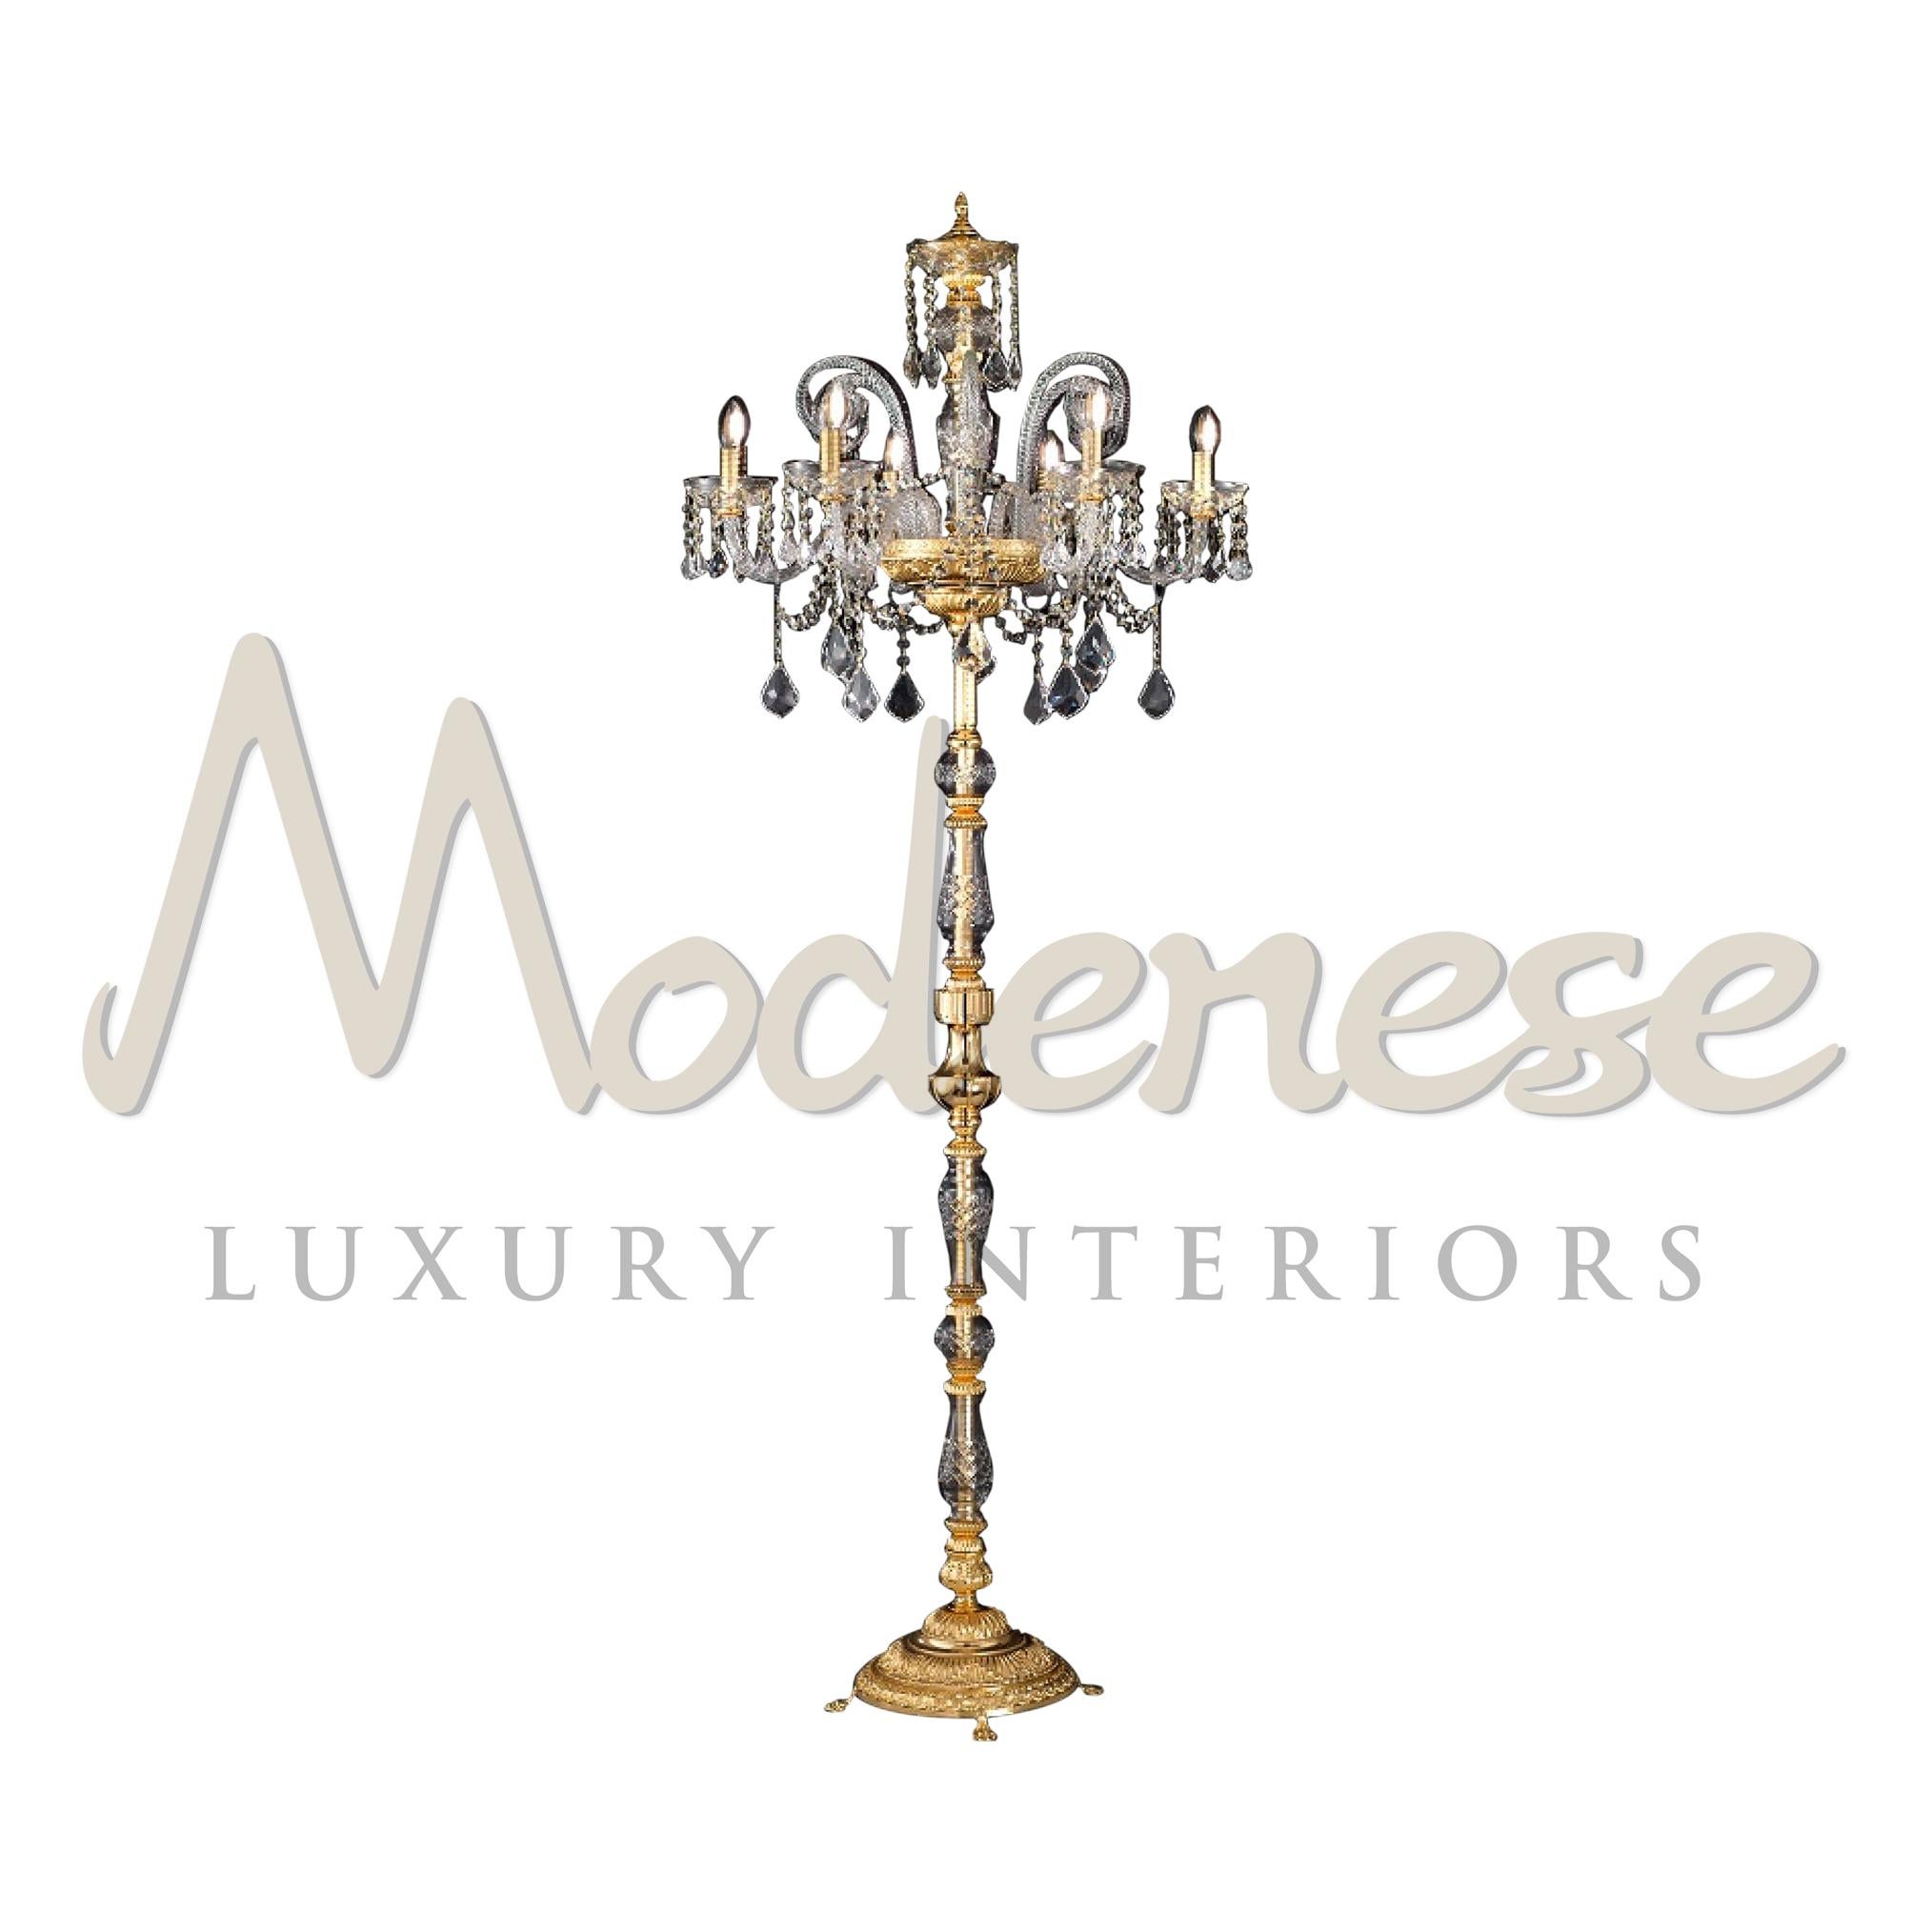 In our offered floor lamps you can find traditional design and innovative materials, as in this 6 lights floor lamp model with gold finishing and crystal, all customized by Modenese Gastone Luxury Interiors. This model requires 6 single E14 screw